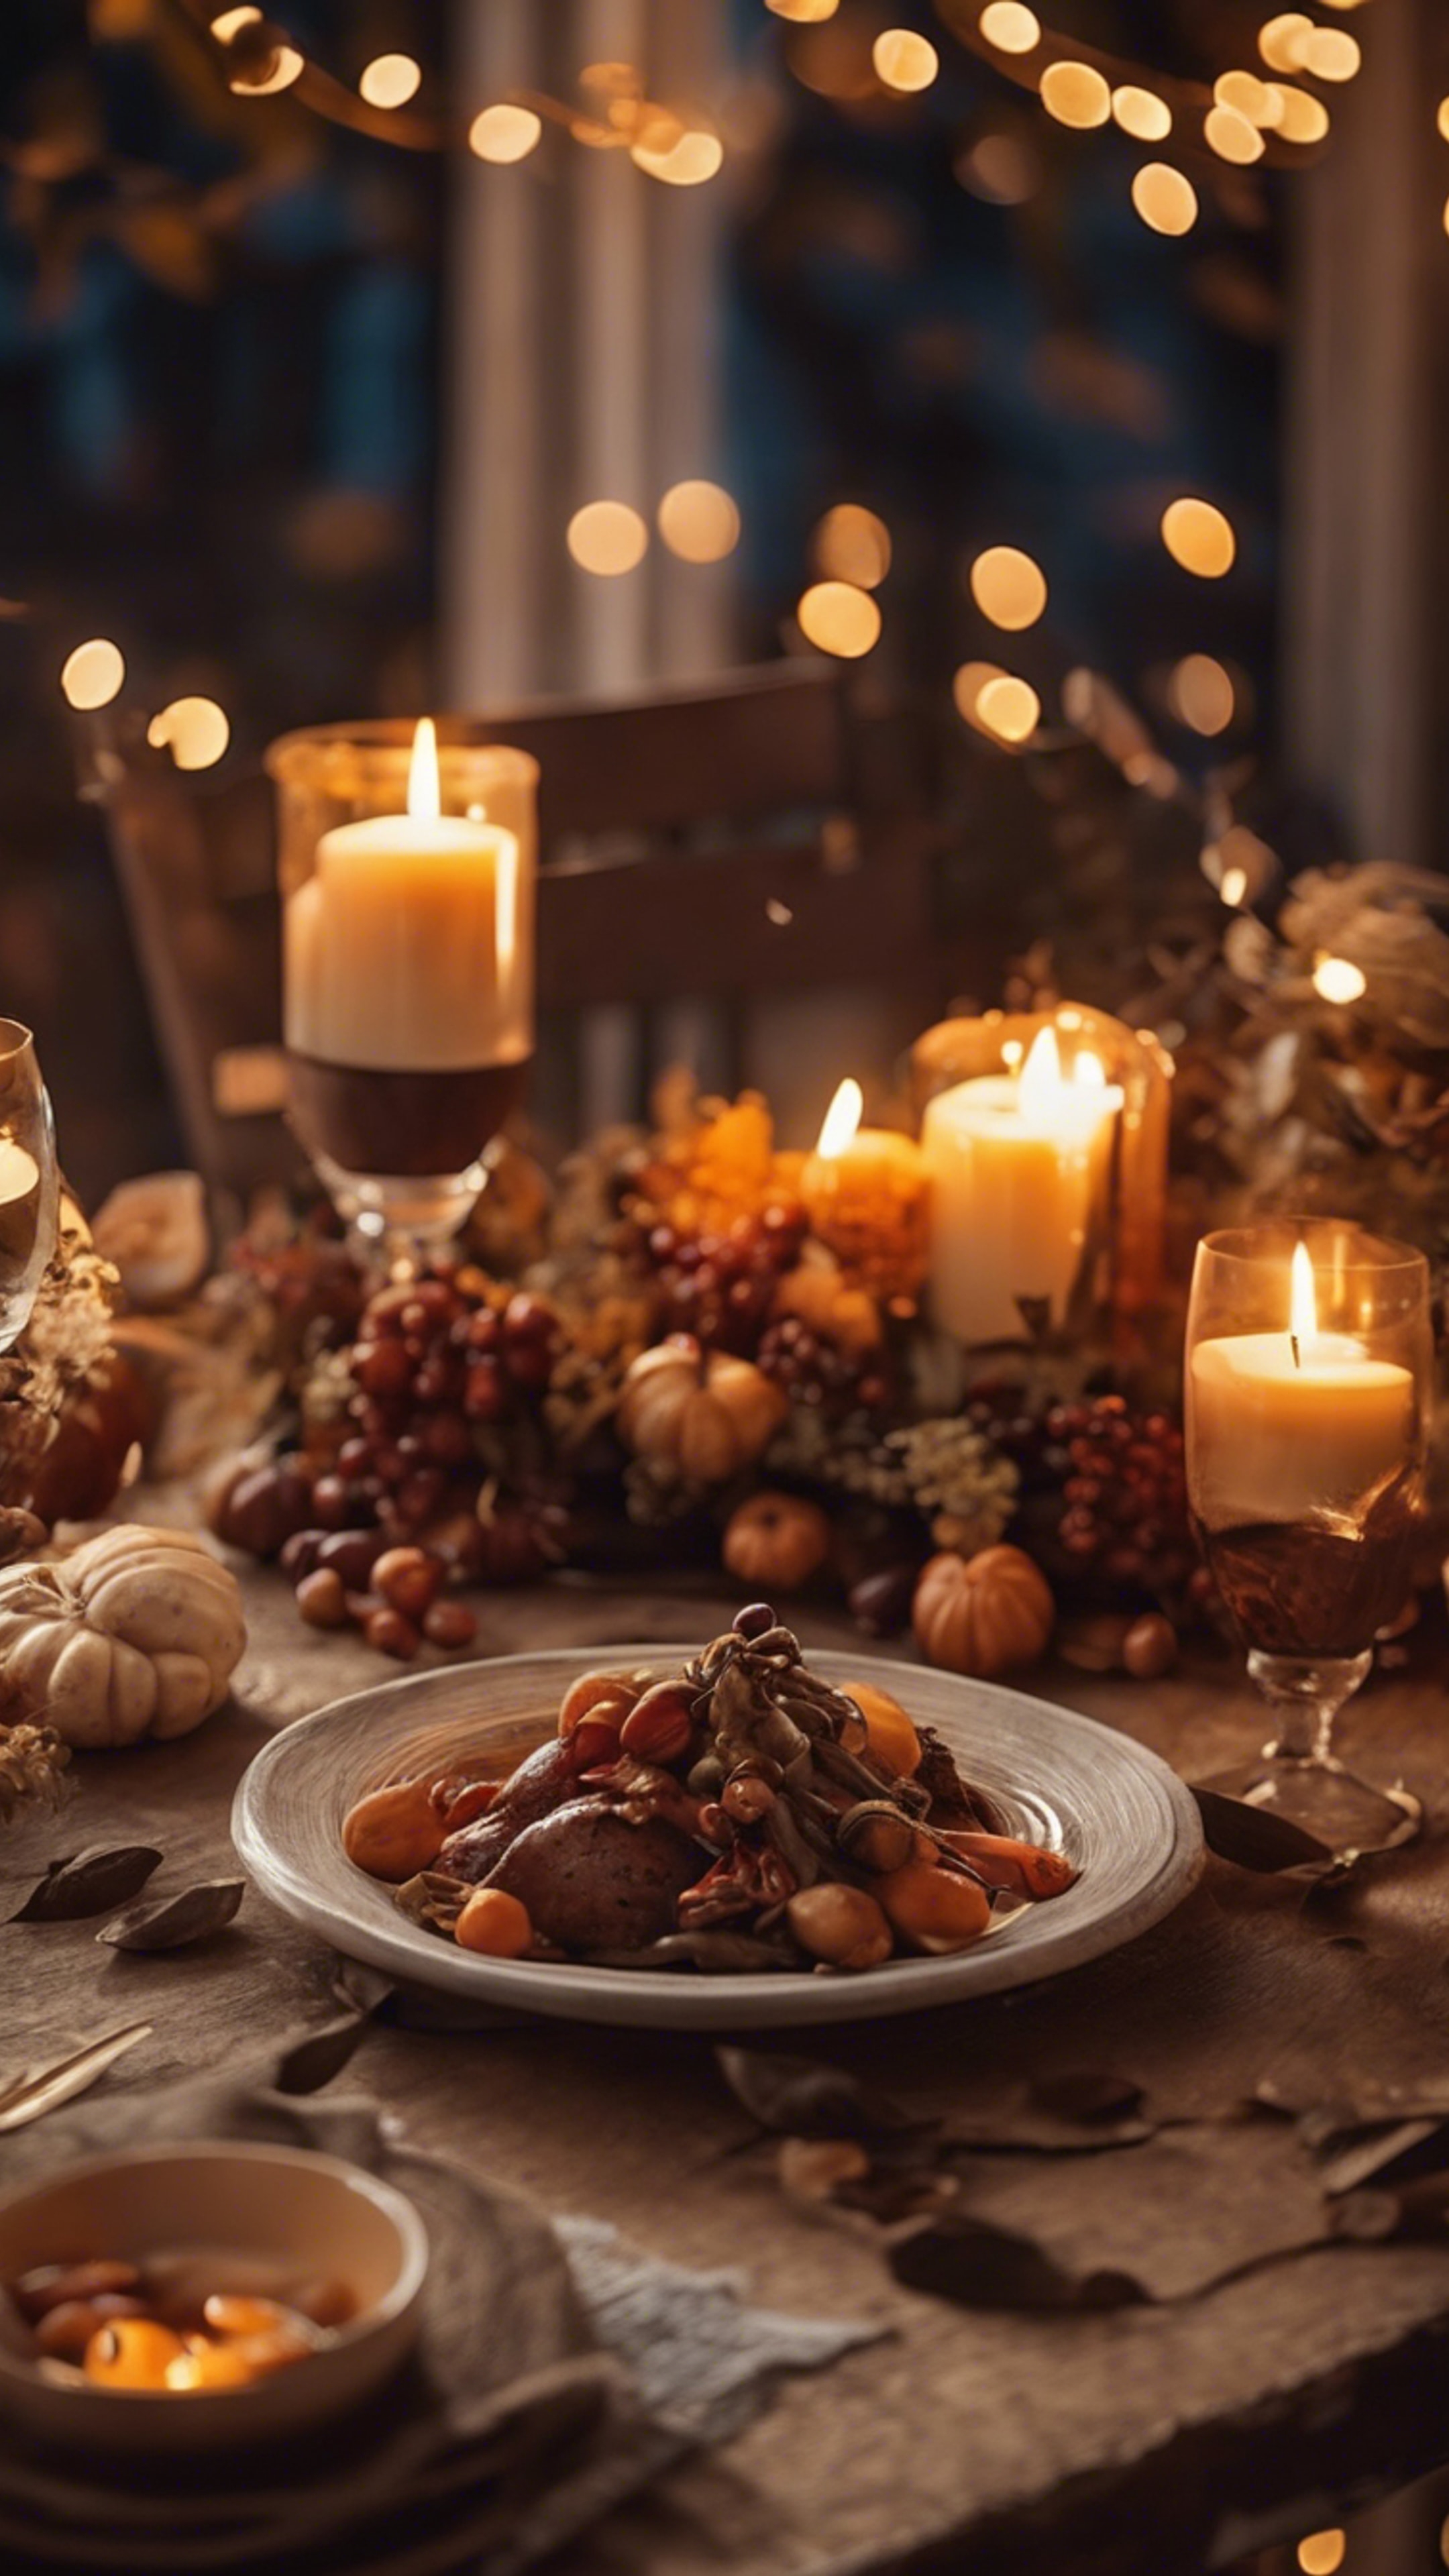 A rustic wooden table set with a Fall harvest dinner, lit by the warm glow of fairy lights and candles. Wallpaper[3b6dce064dd34370adfb]